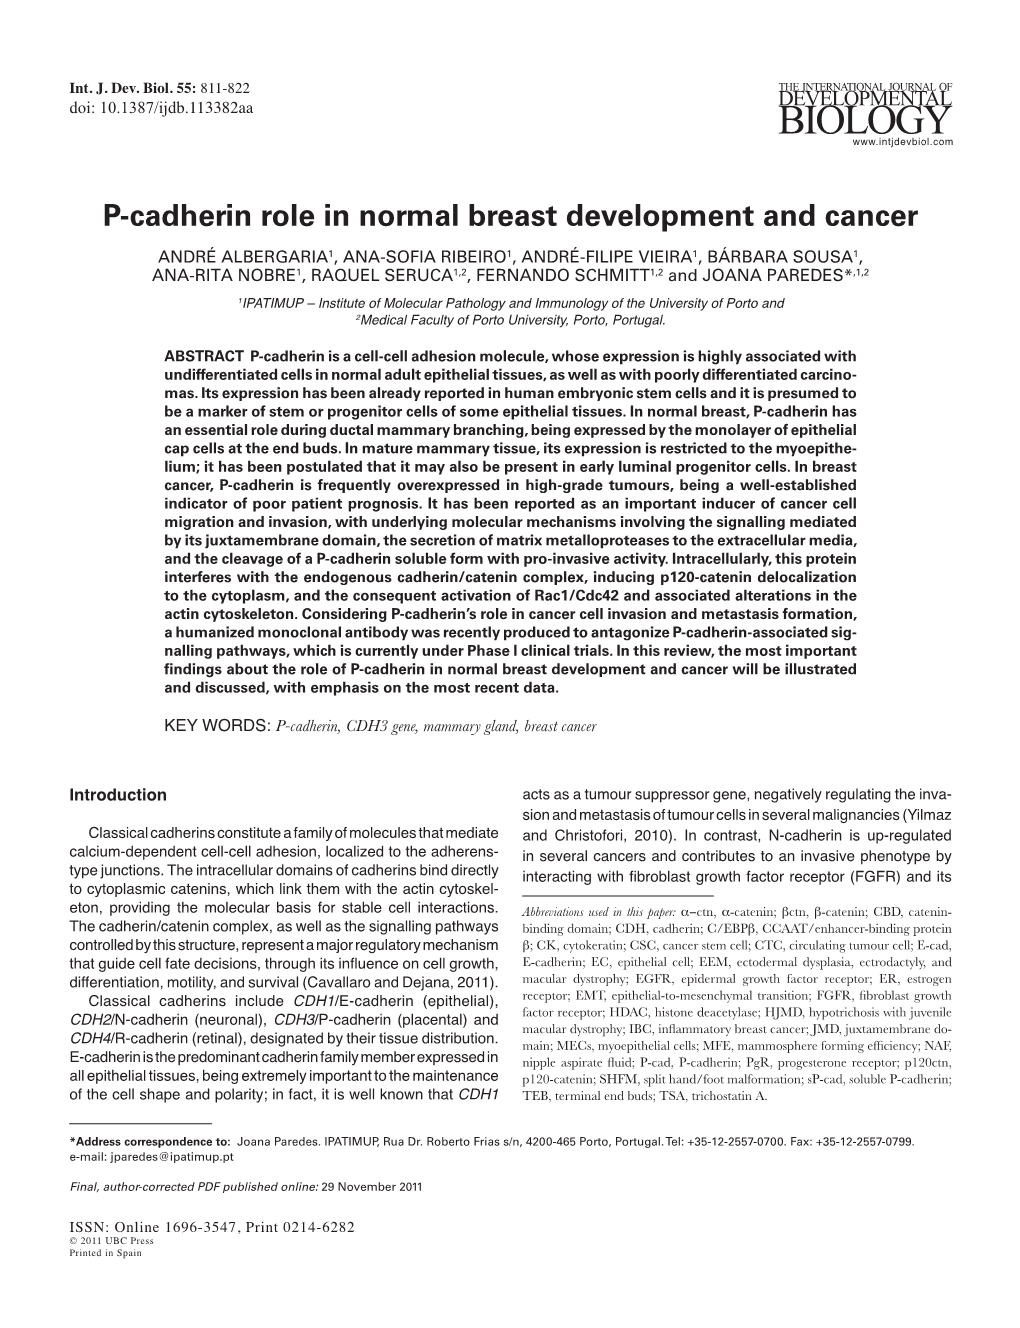 P-Cadherin Role in Normal Breast Development and Cancer